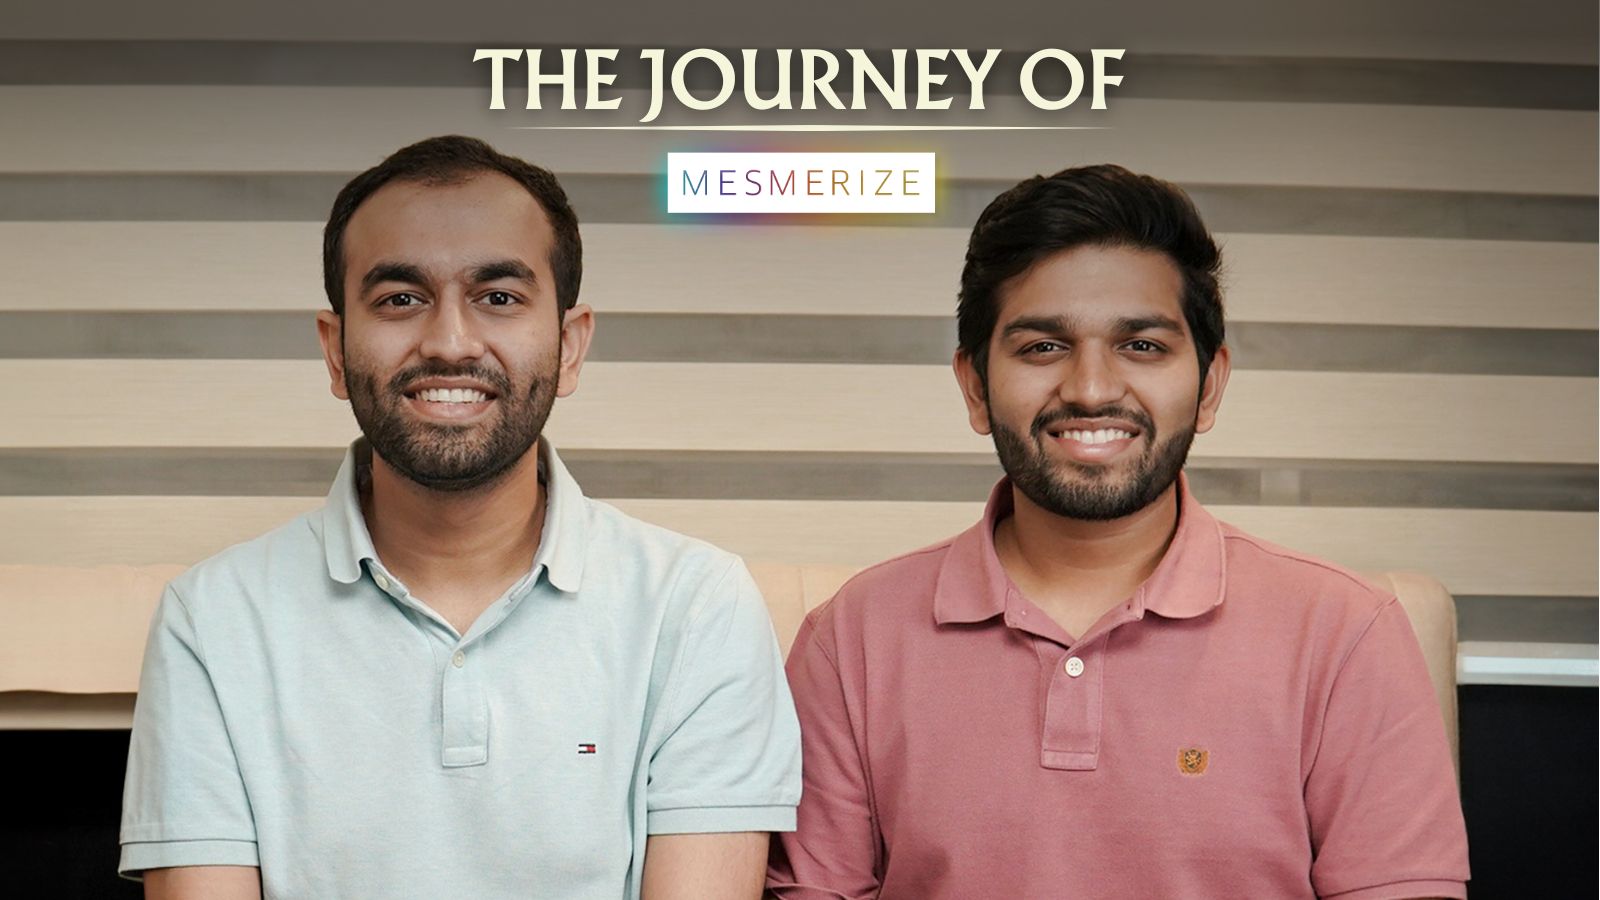 The Journey of Mesmerize: Insights from Our Co-Founders